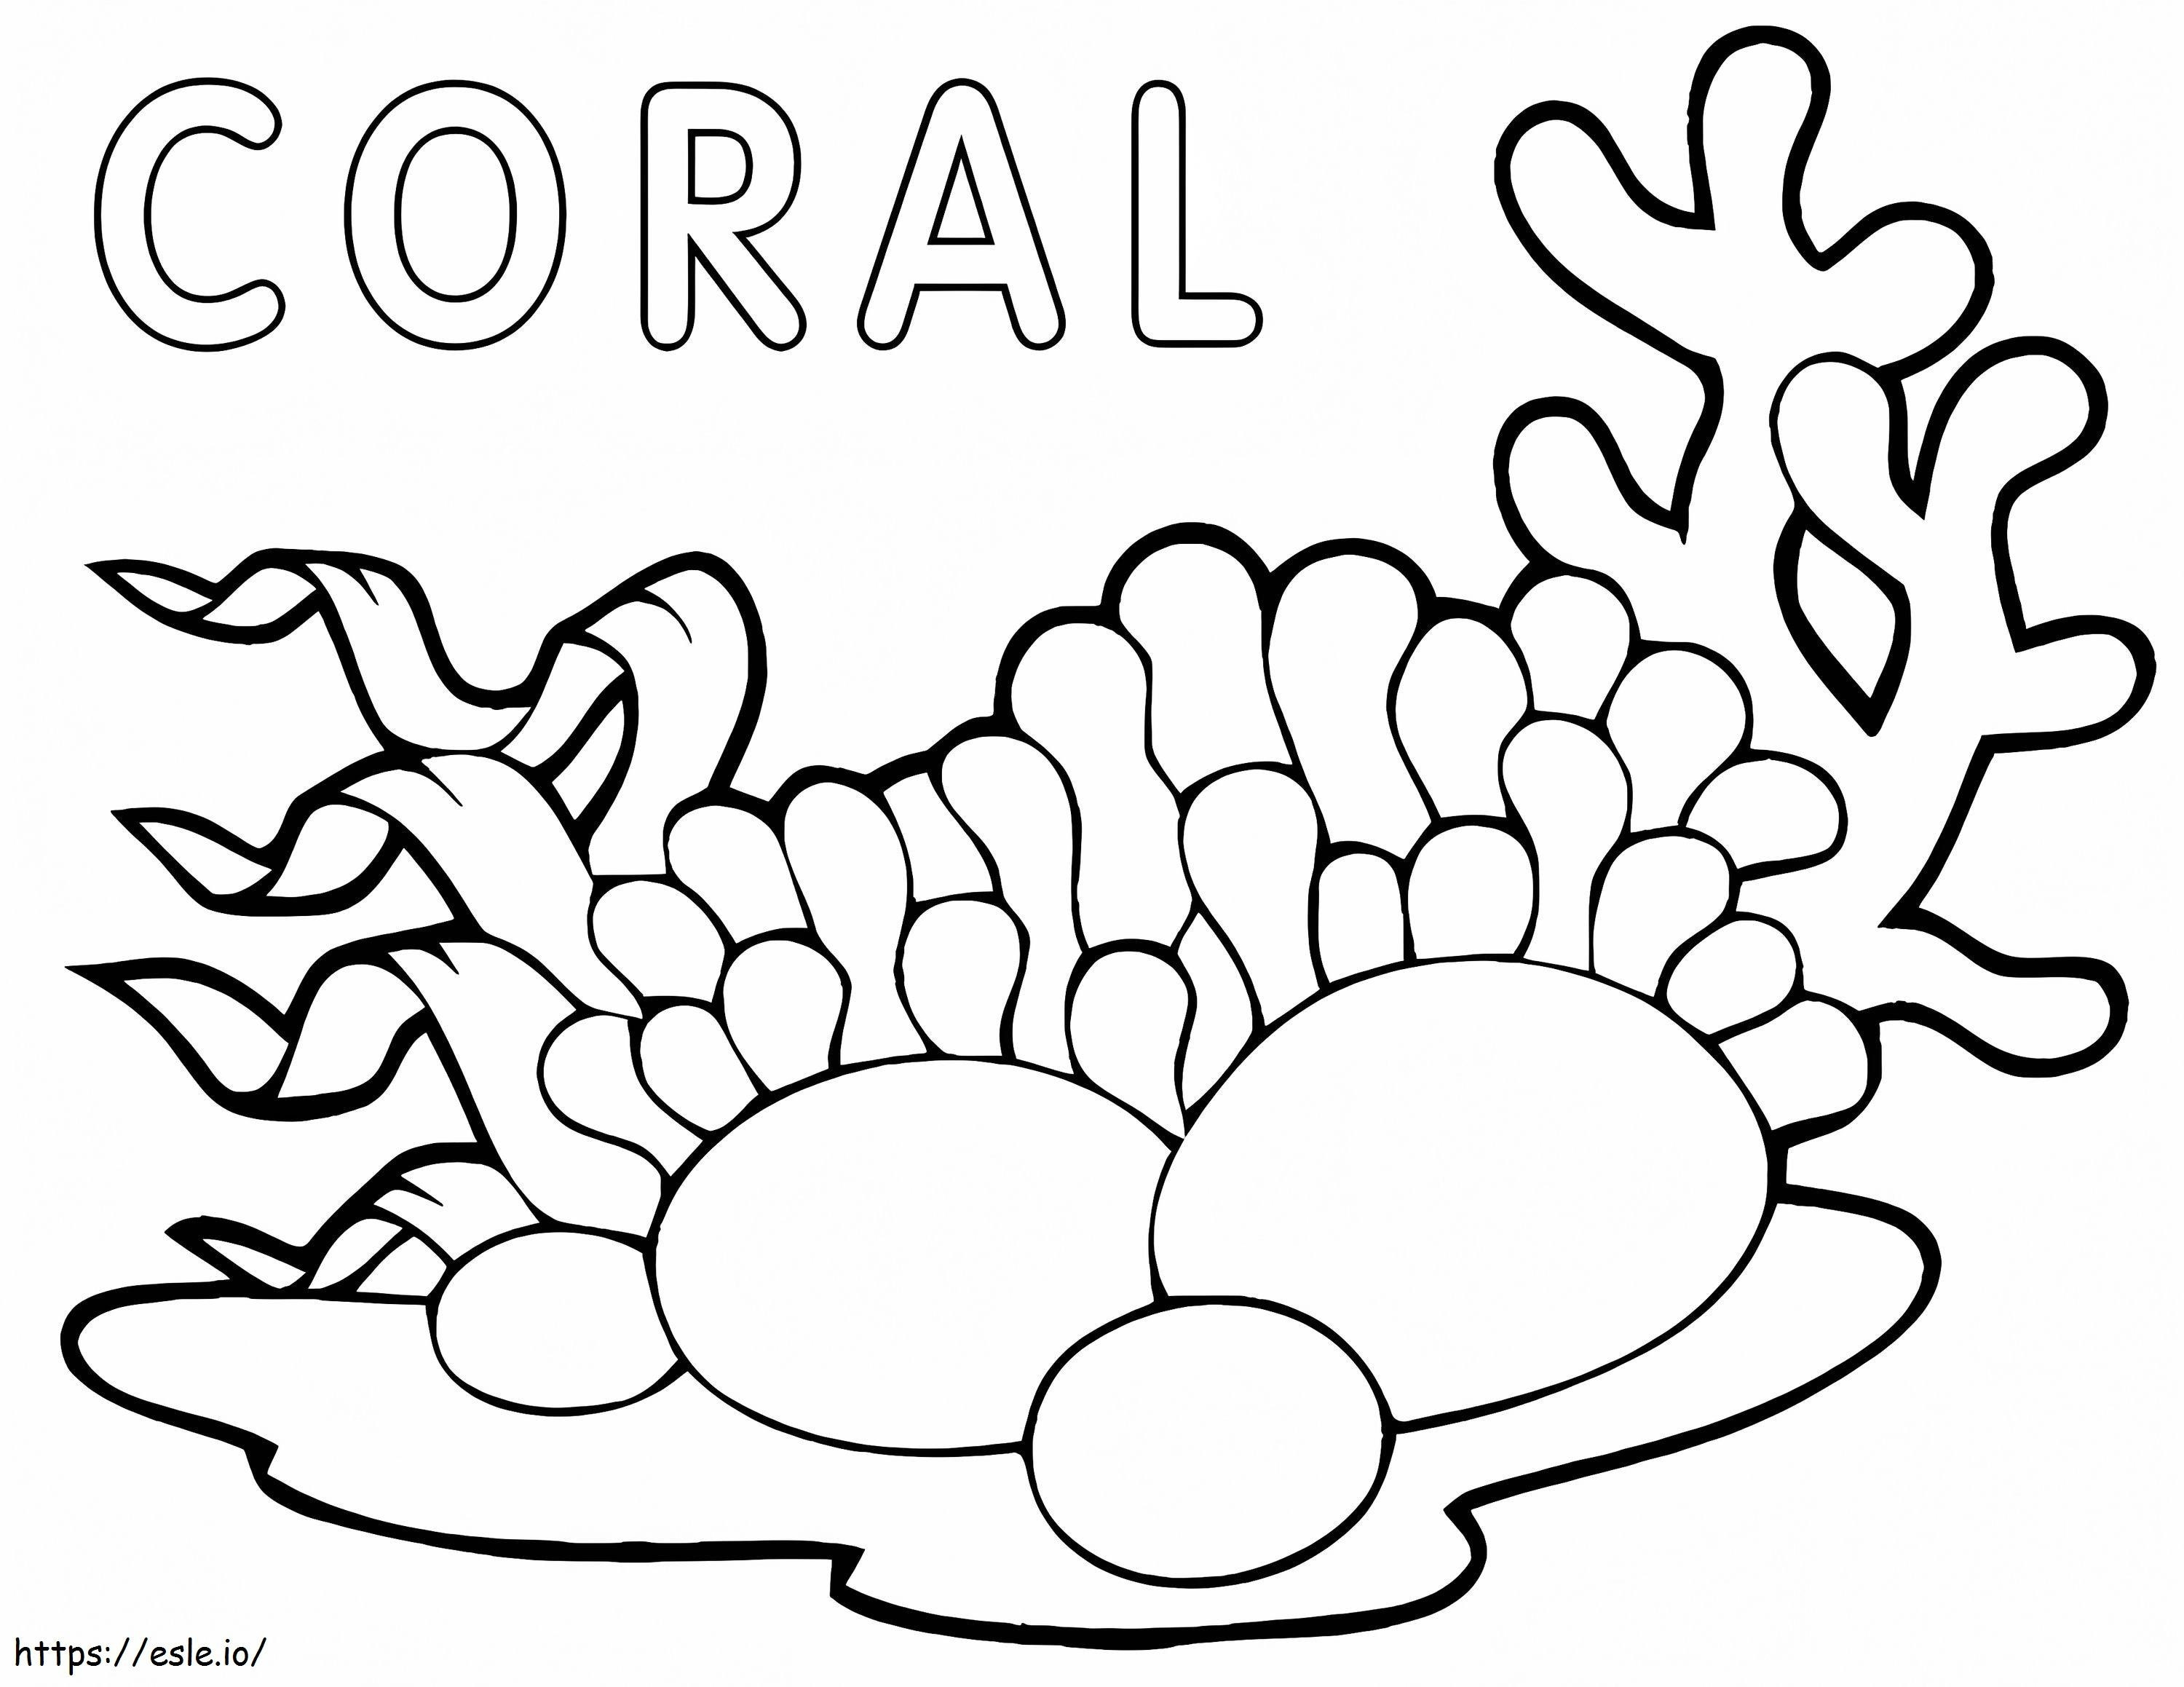 Coral 1 coloring page